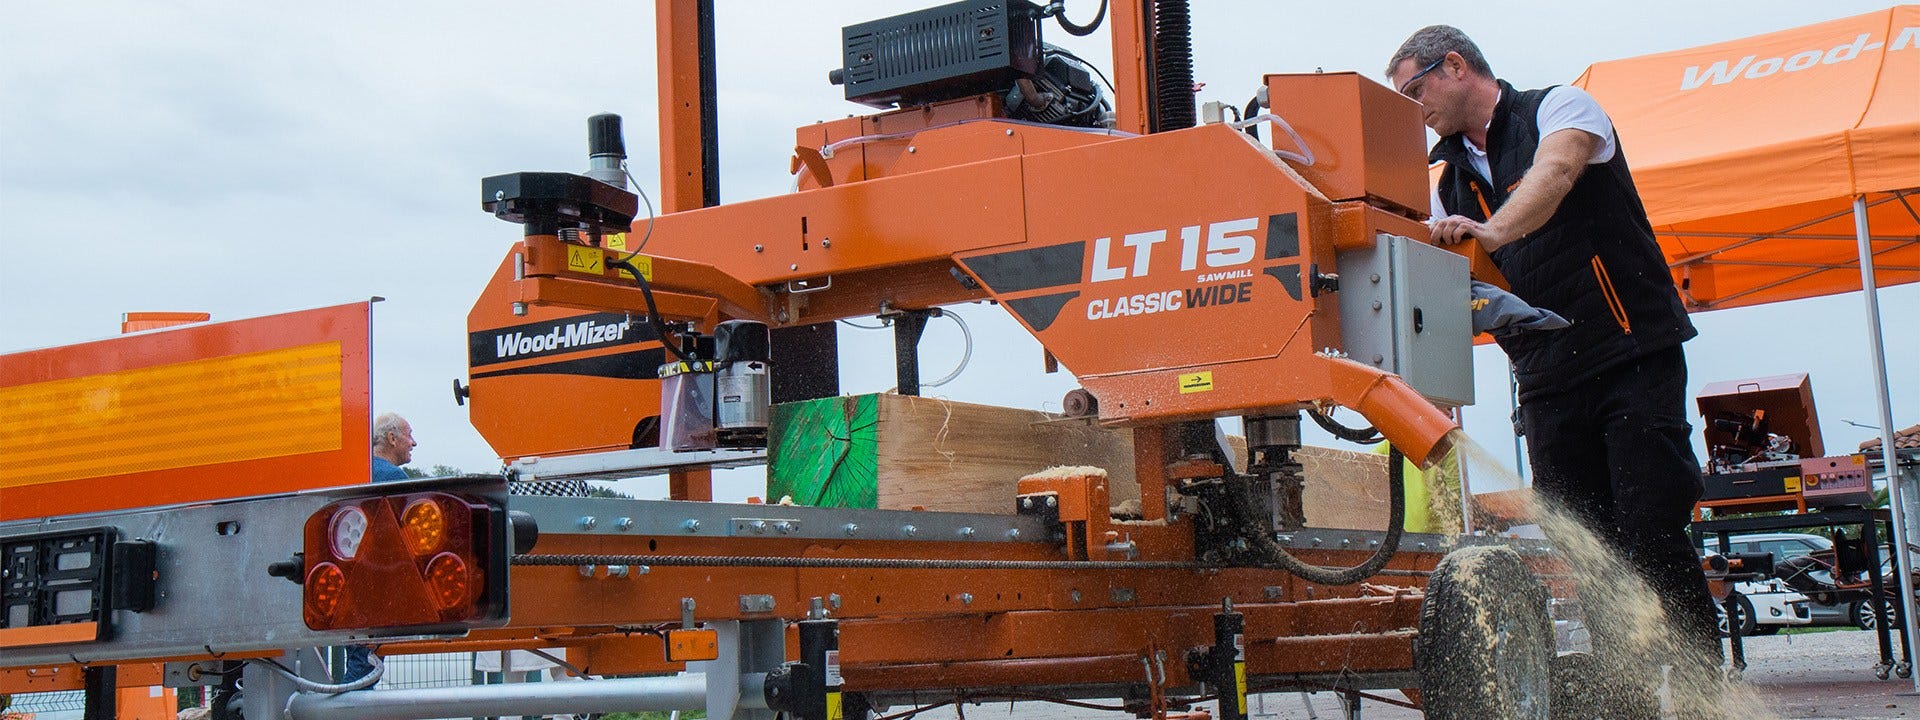 Wood-Mizer Adds WIDE Option to Popular LT15CLASSIC Mobile Sawmill 